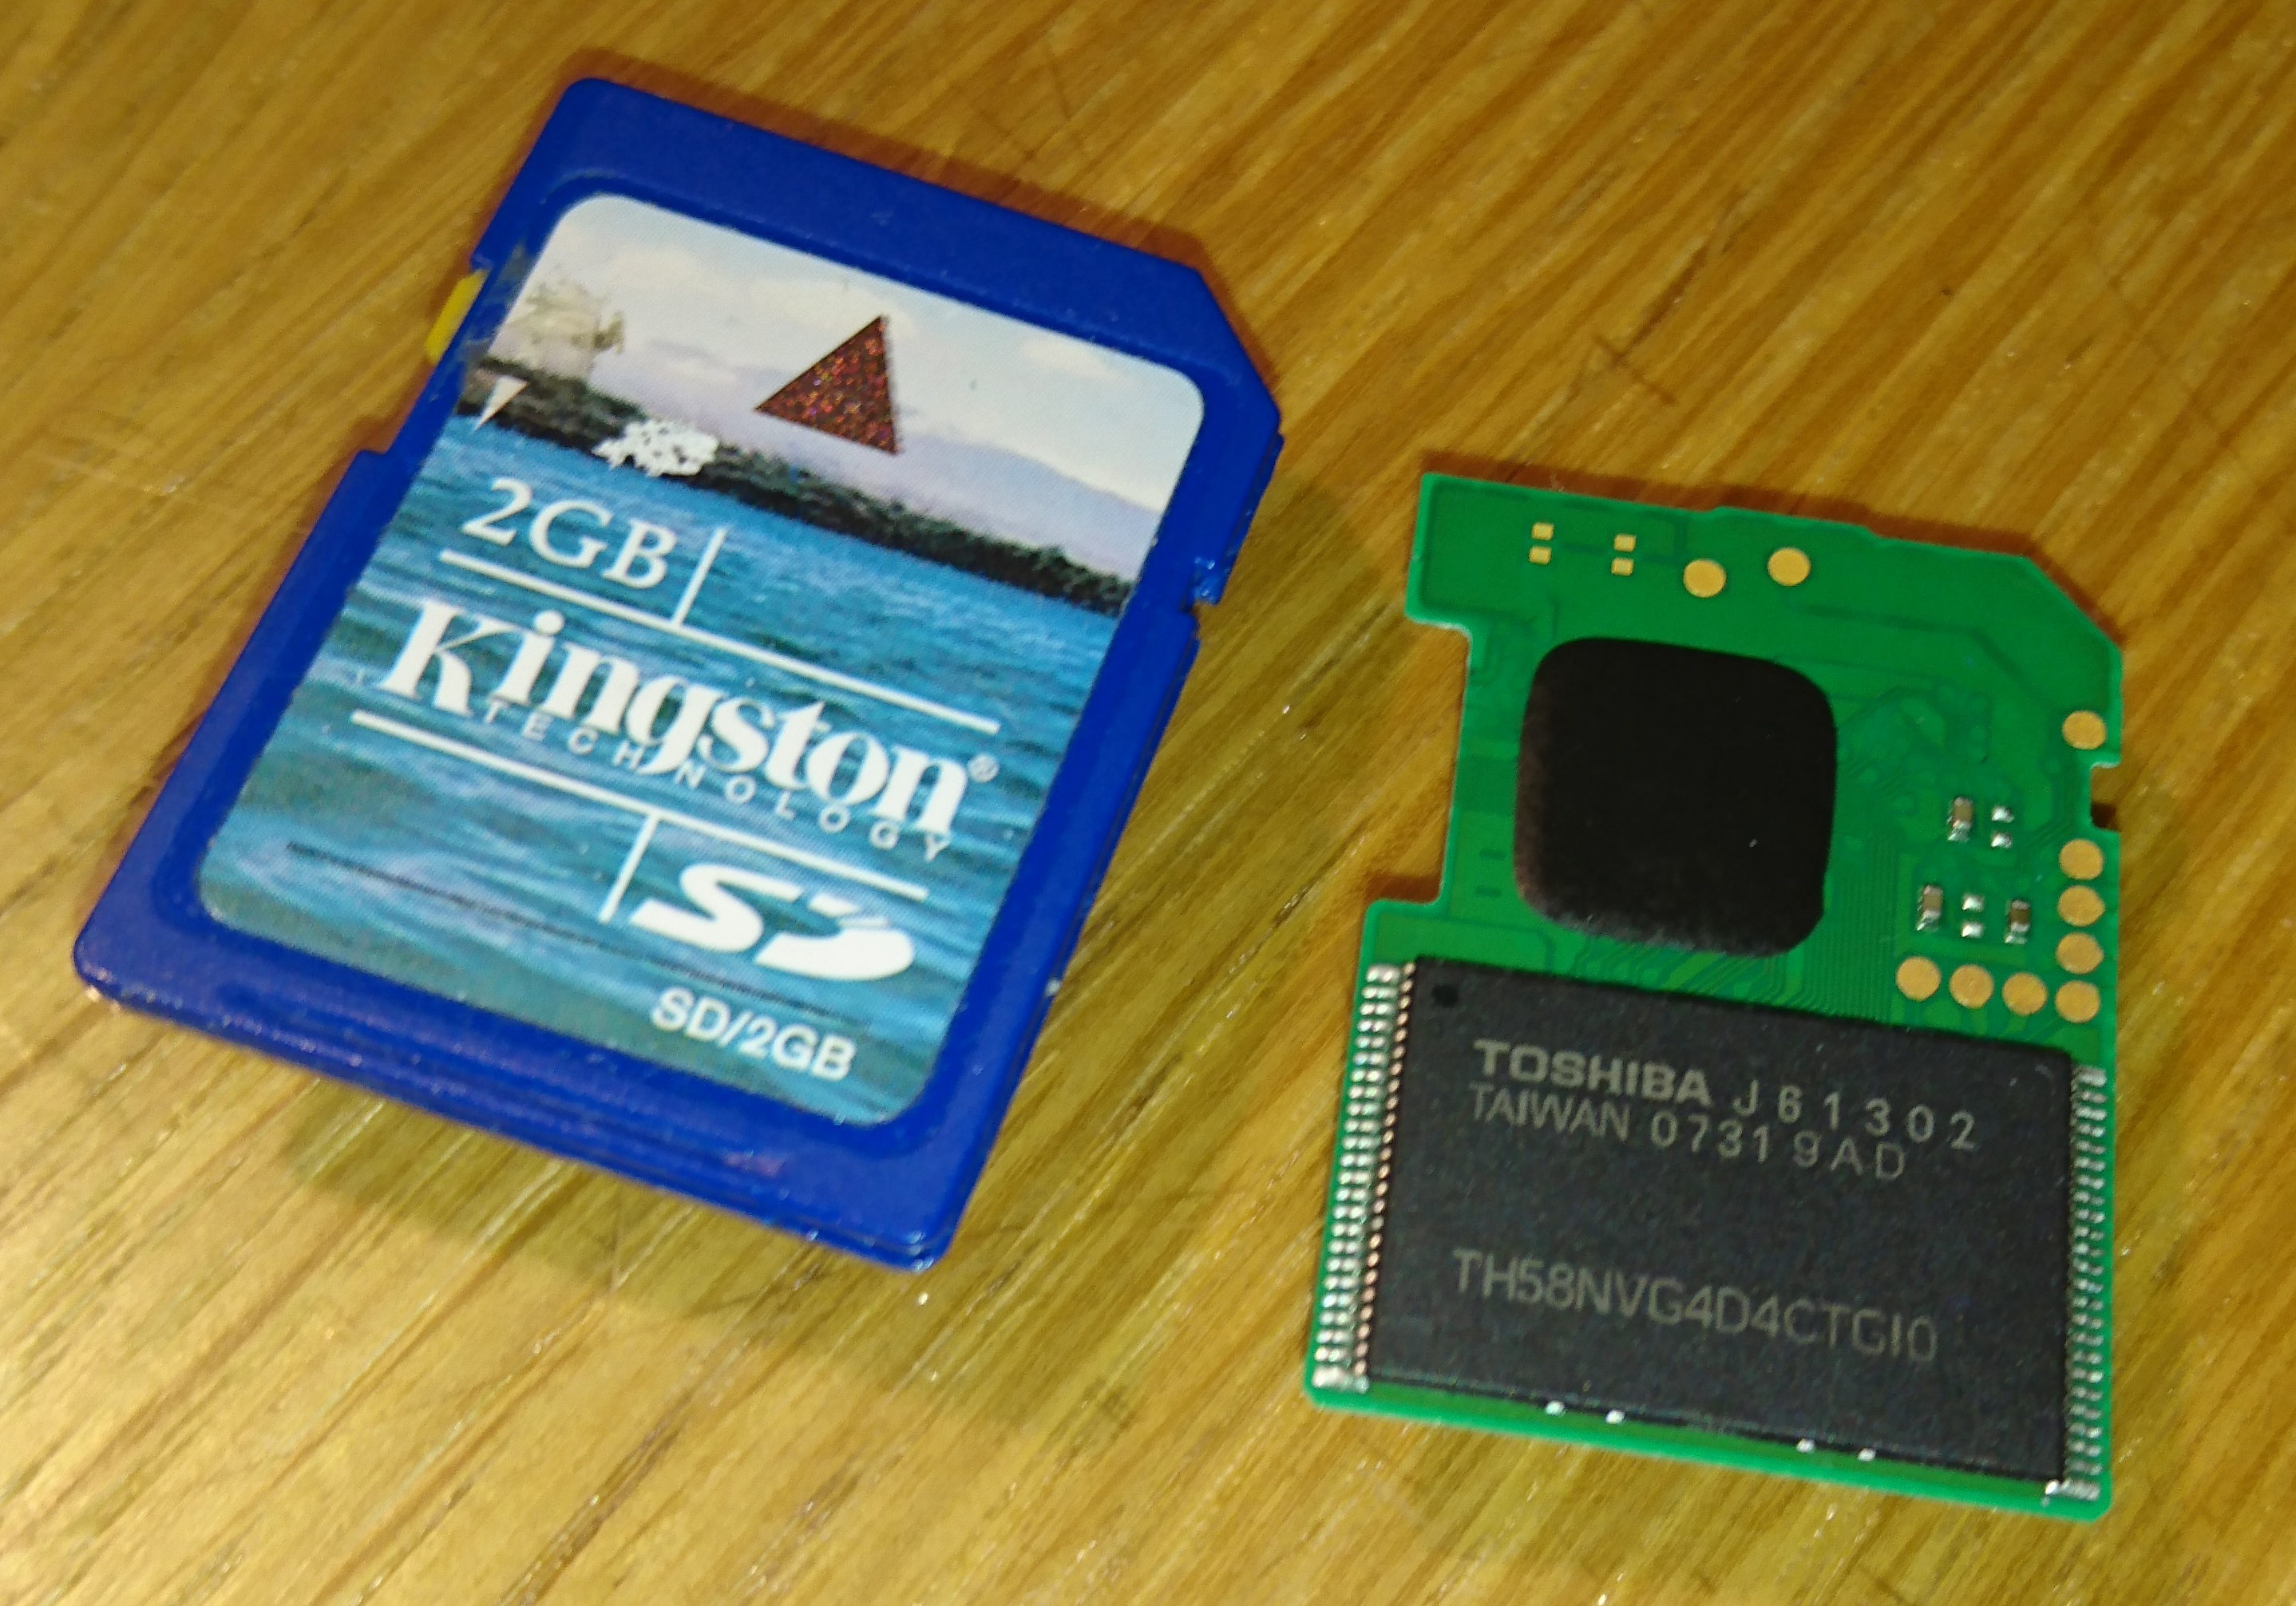 original-sd-card-before-chip-replacement.jpg